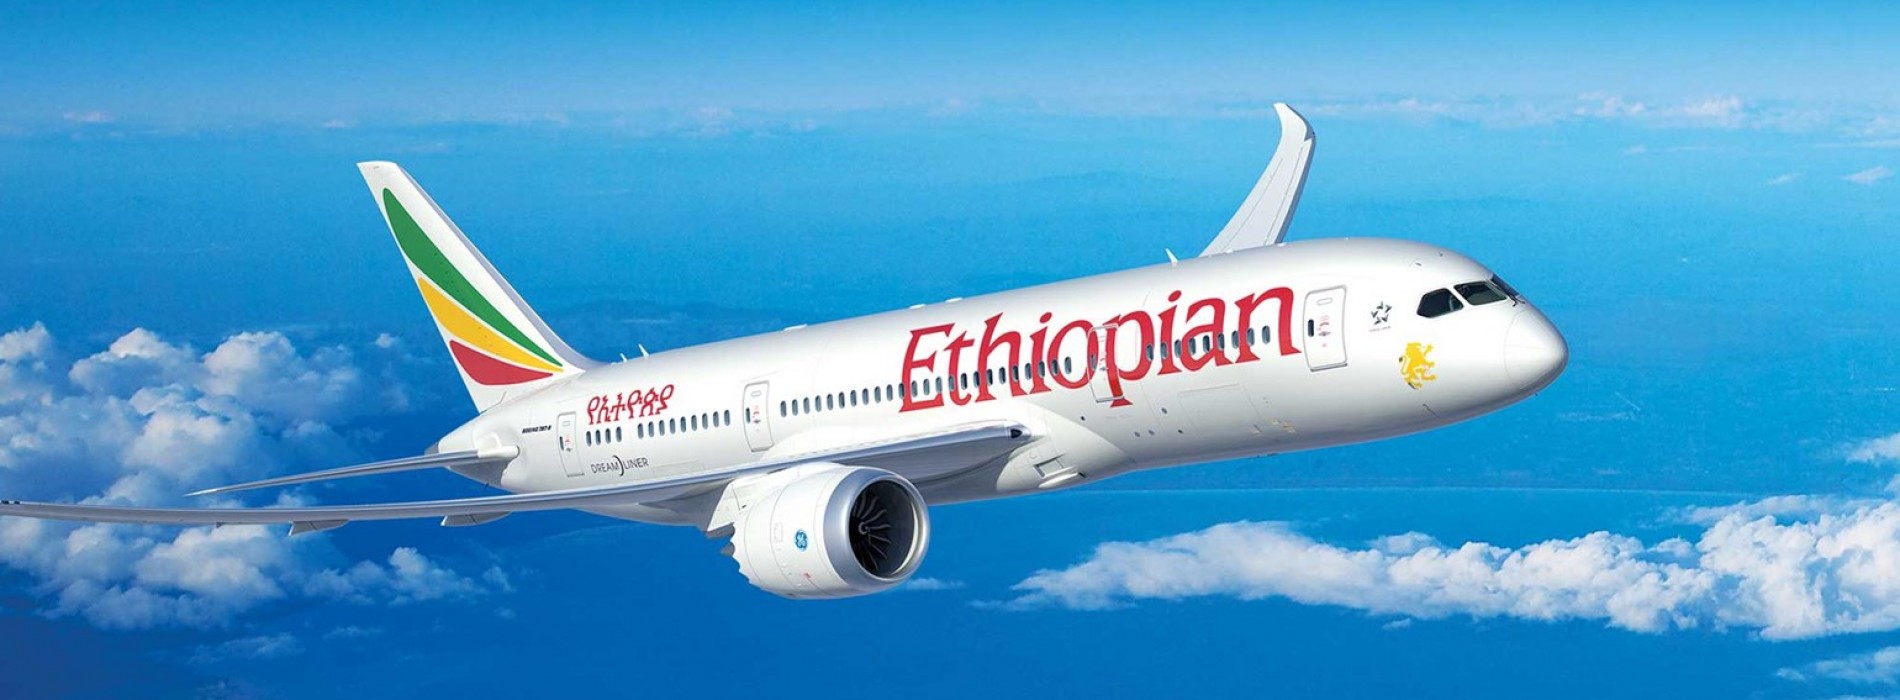 Ethiopian rolls out stopover packages to promote tourism